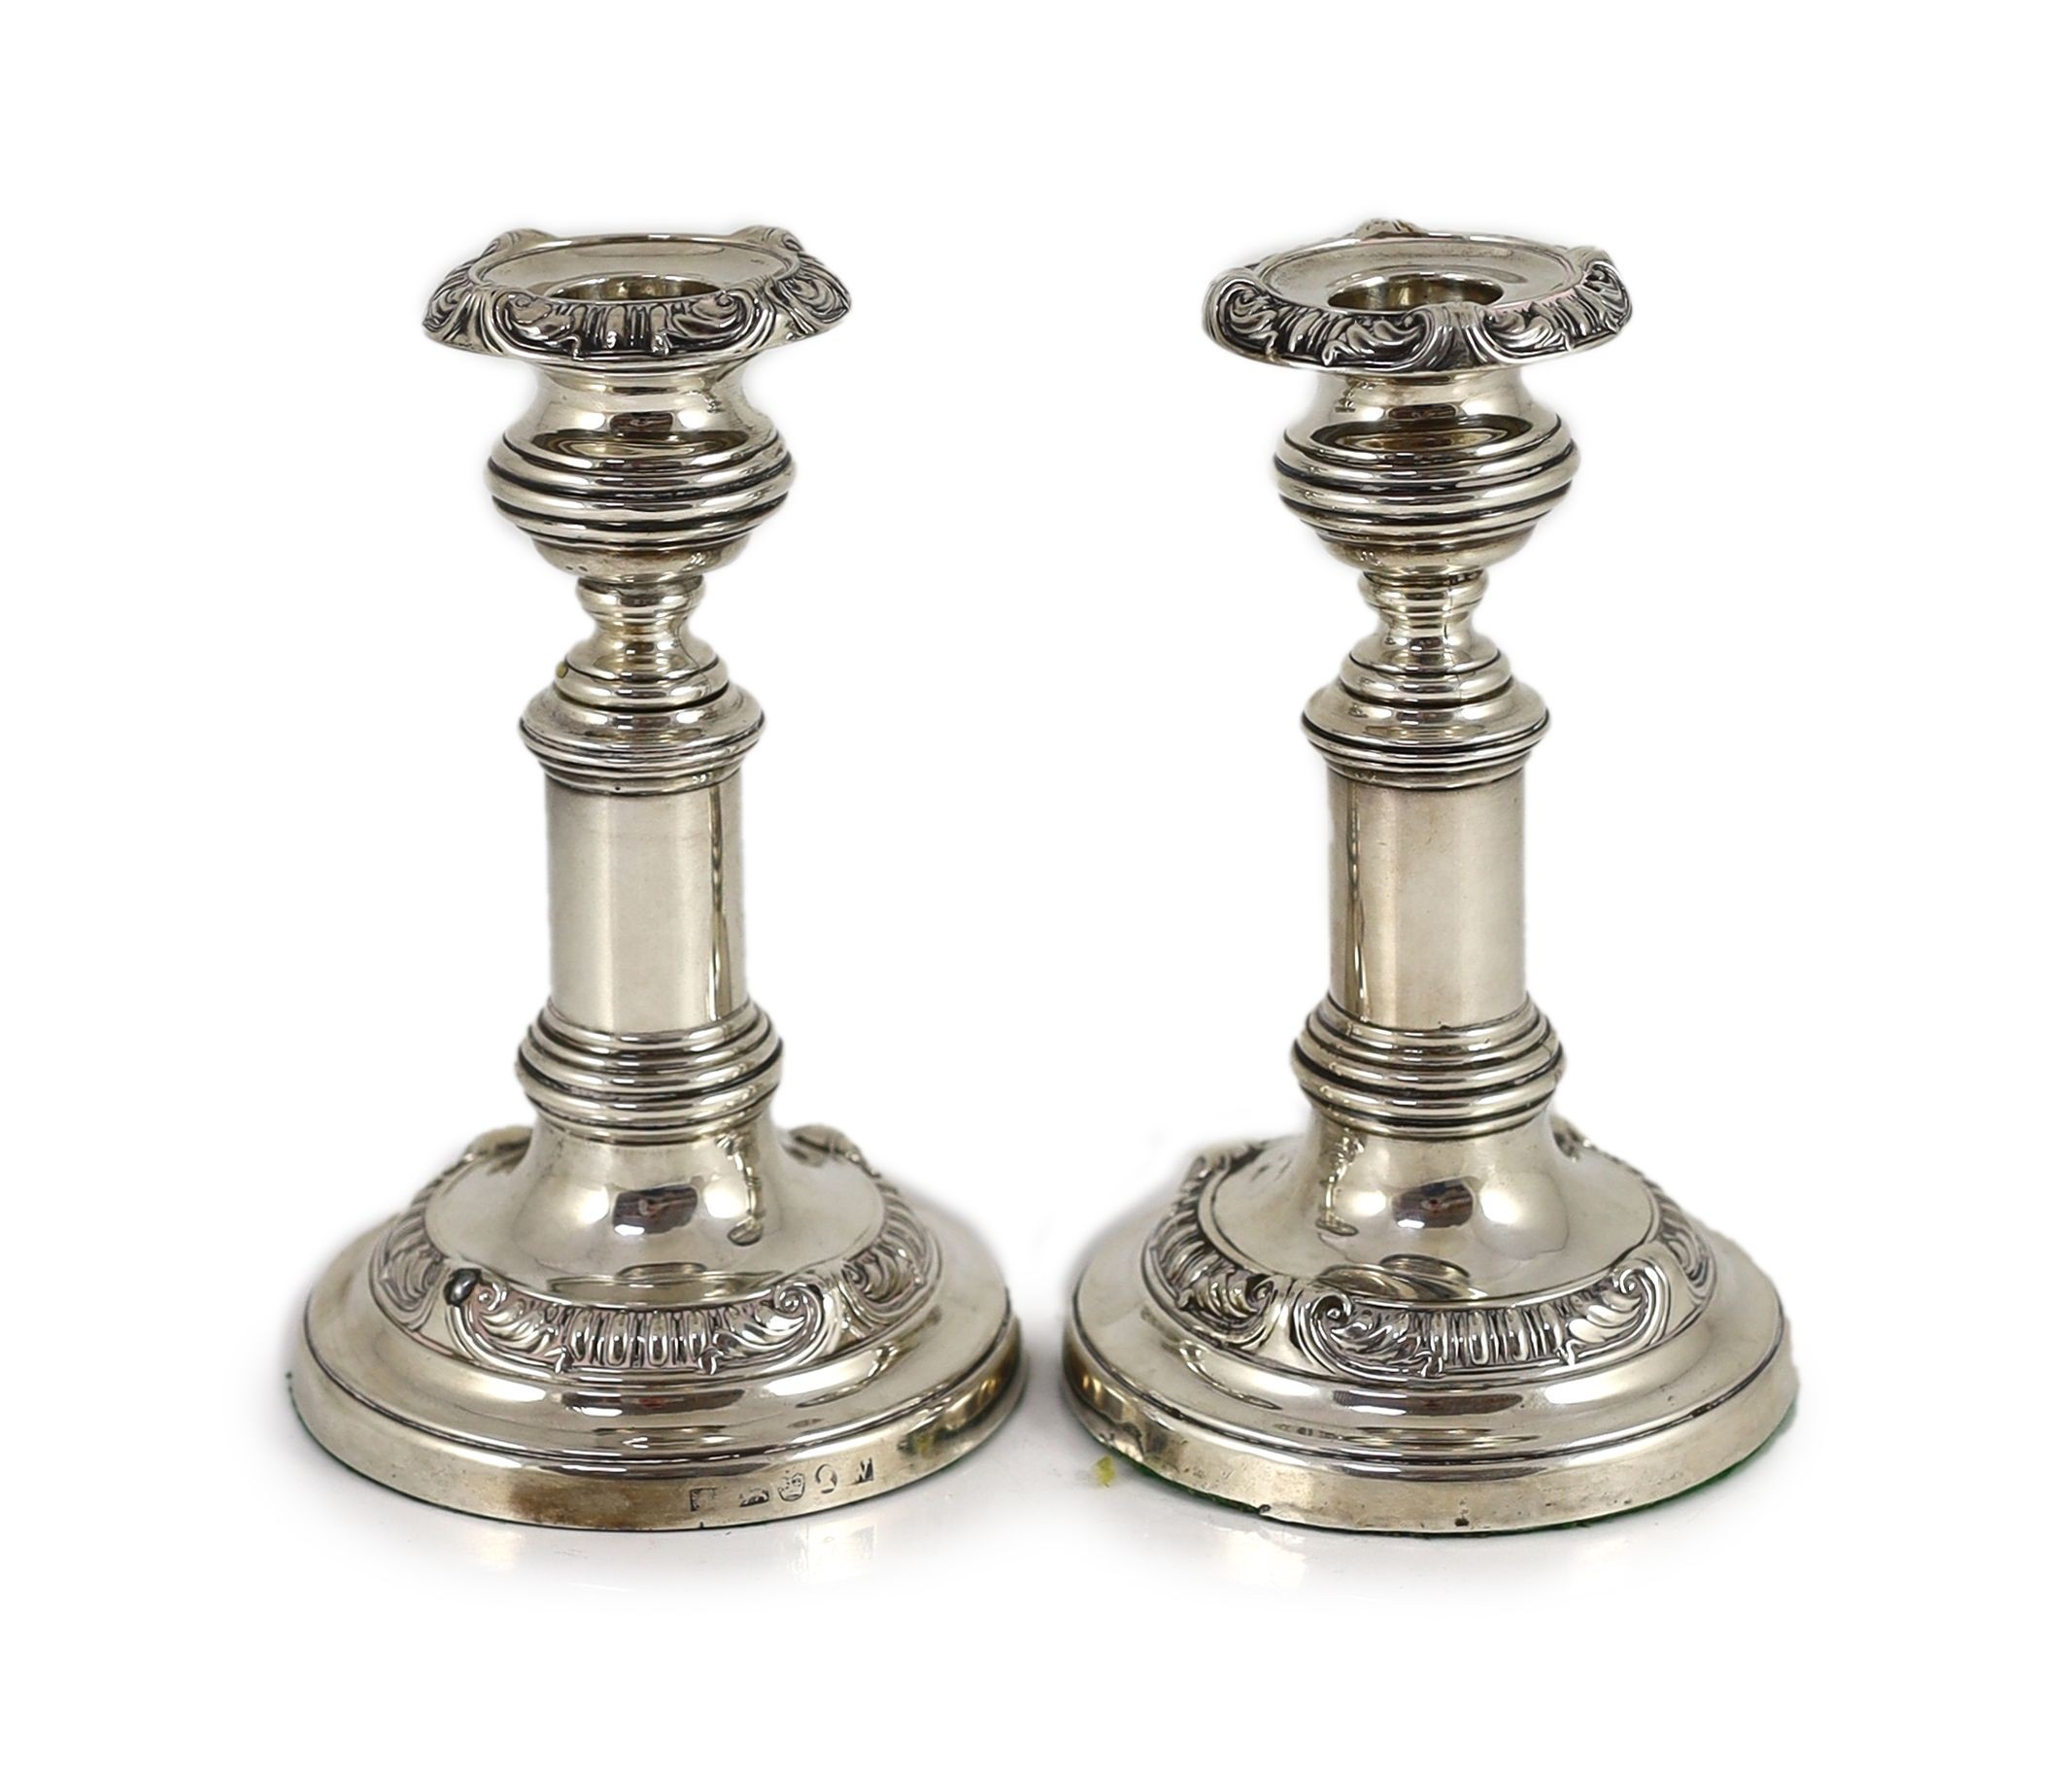 A pair of George III silver telescopic candlesticks, by S.C. Younge & Co